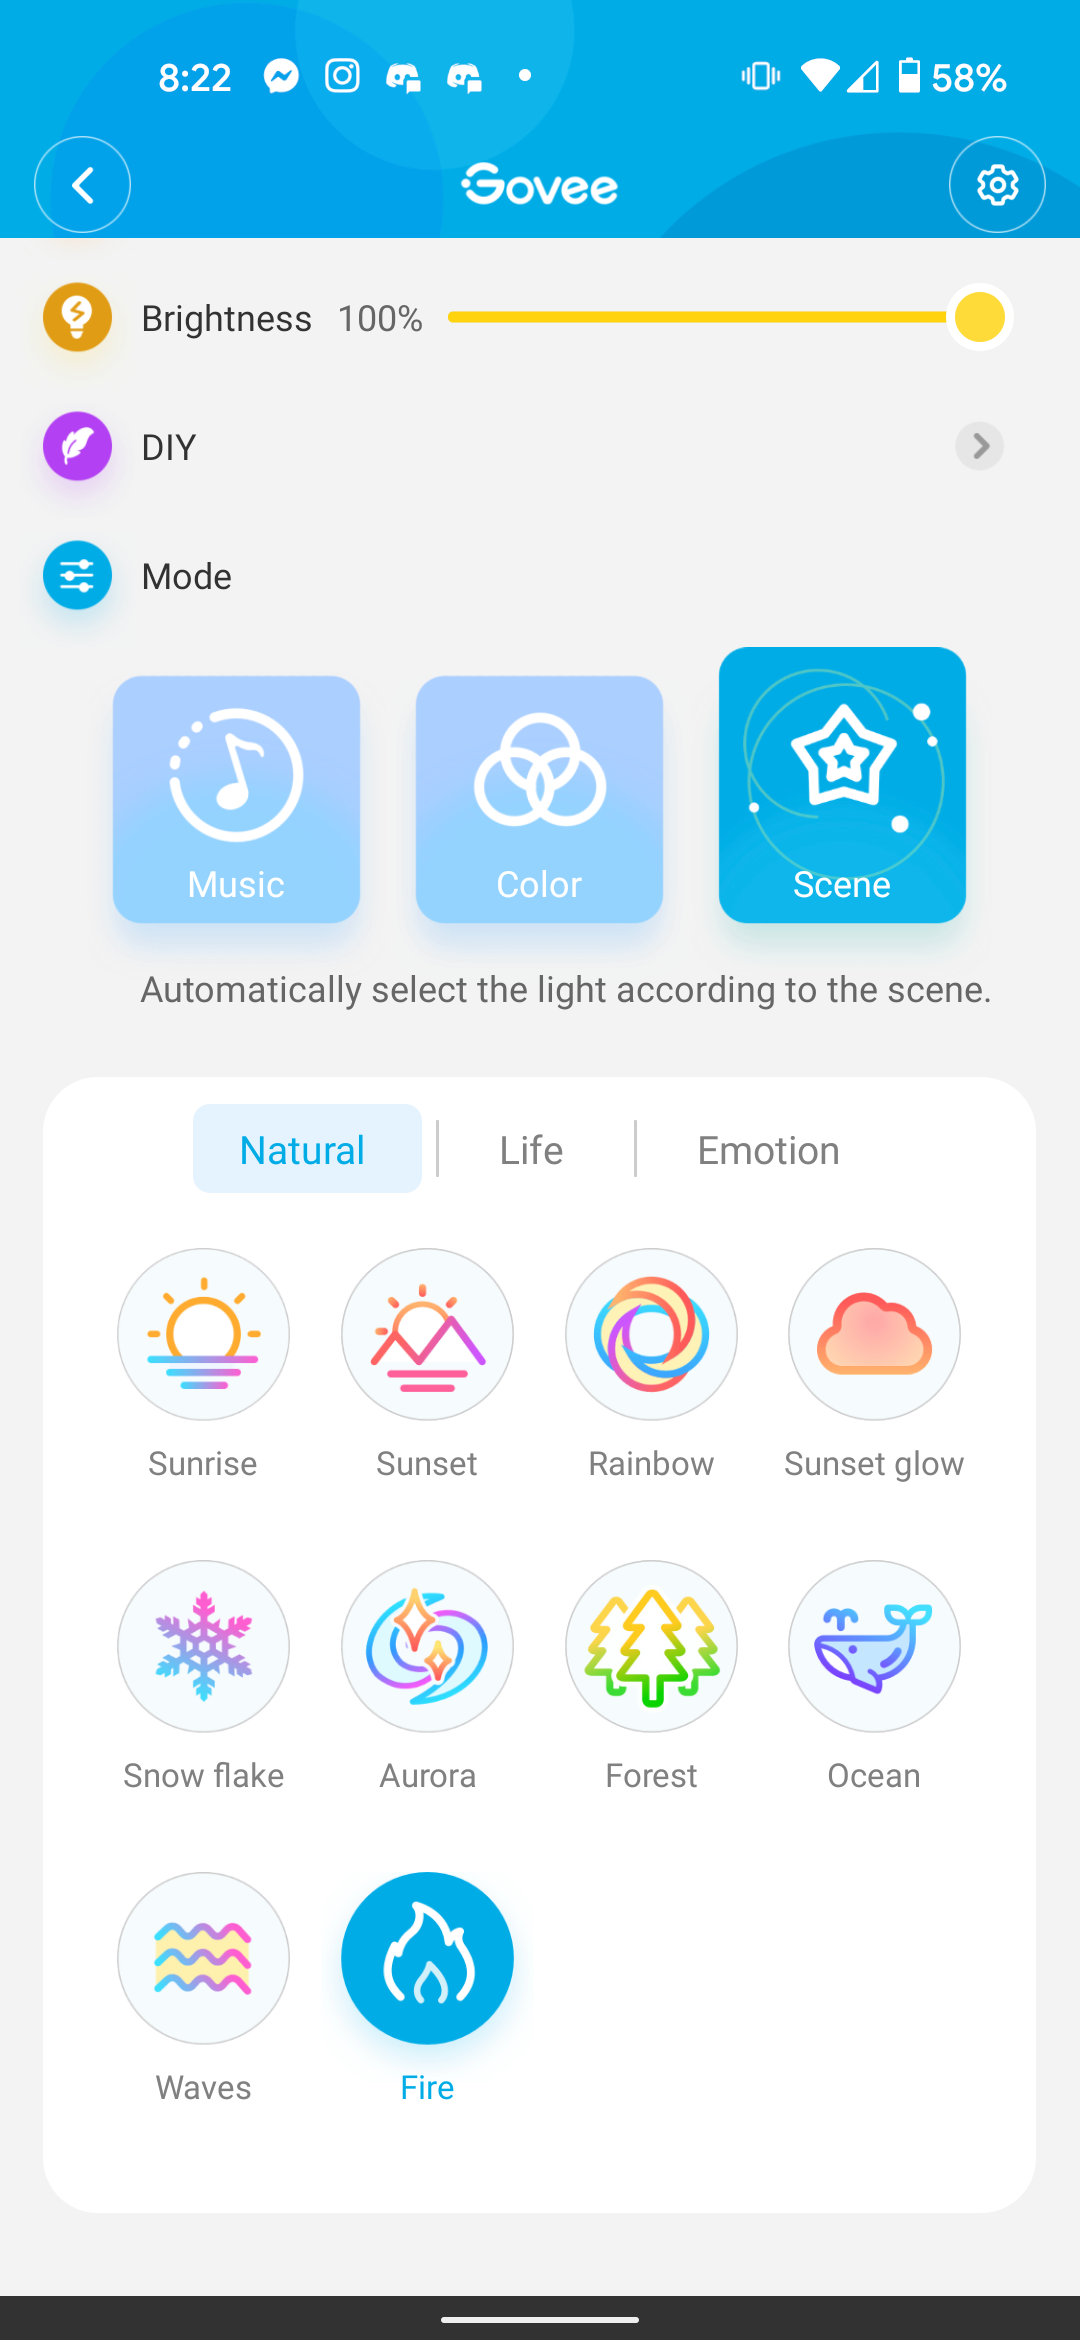 The Govee app showing the Aura Lamp's scenes